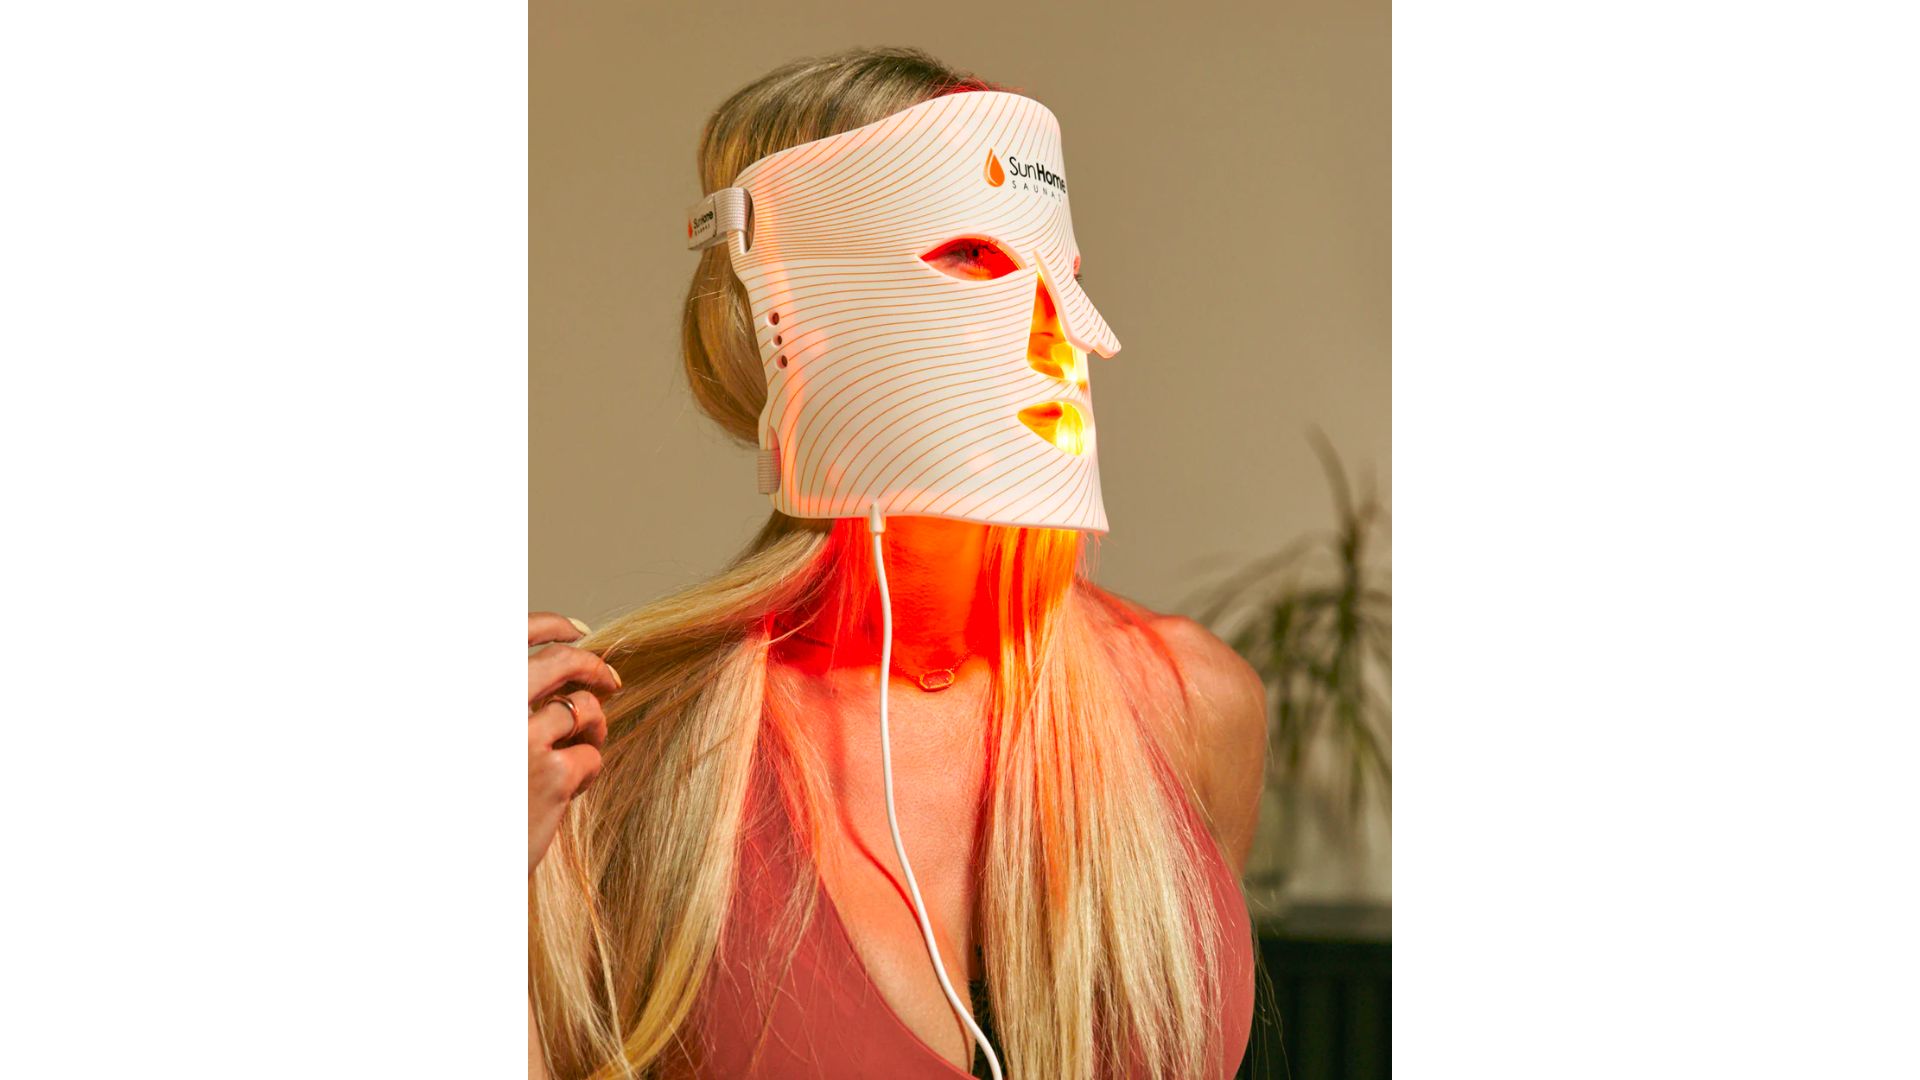 Best LED Light Therapy Masks